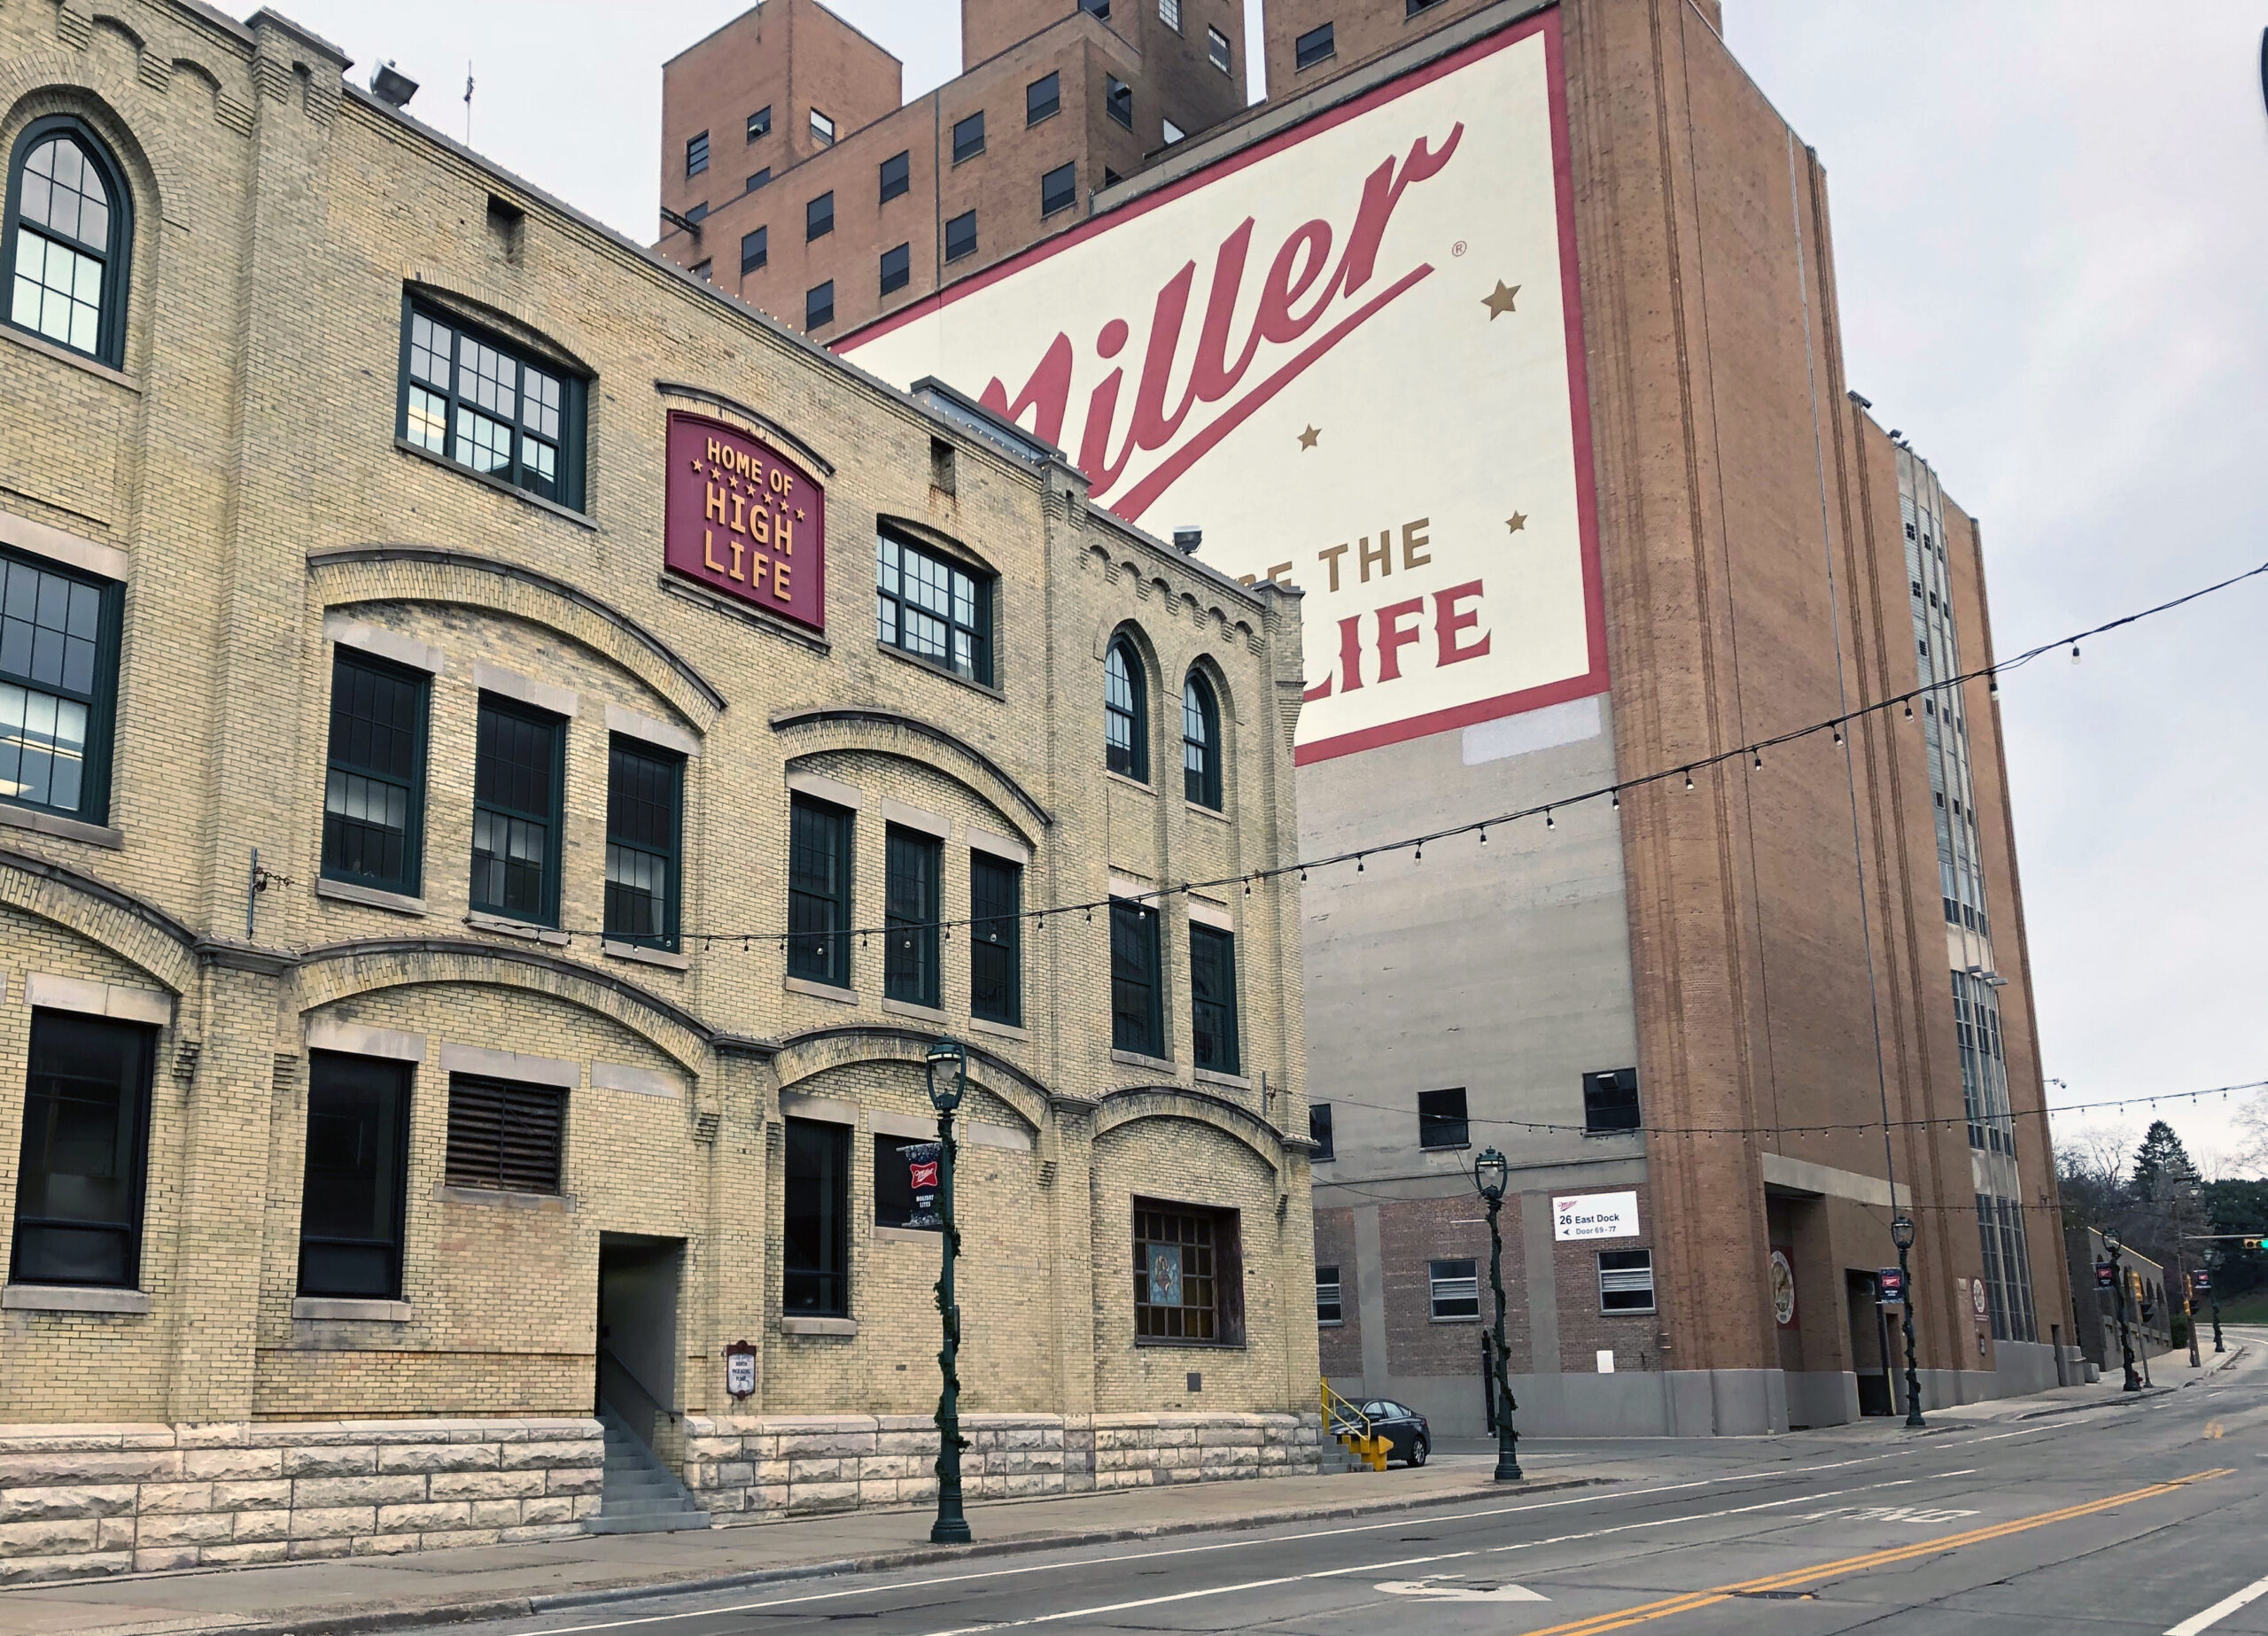 Exterior of Miller brewery